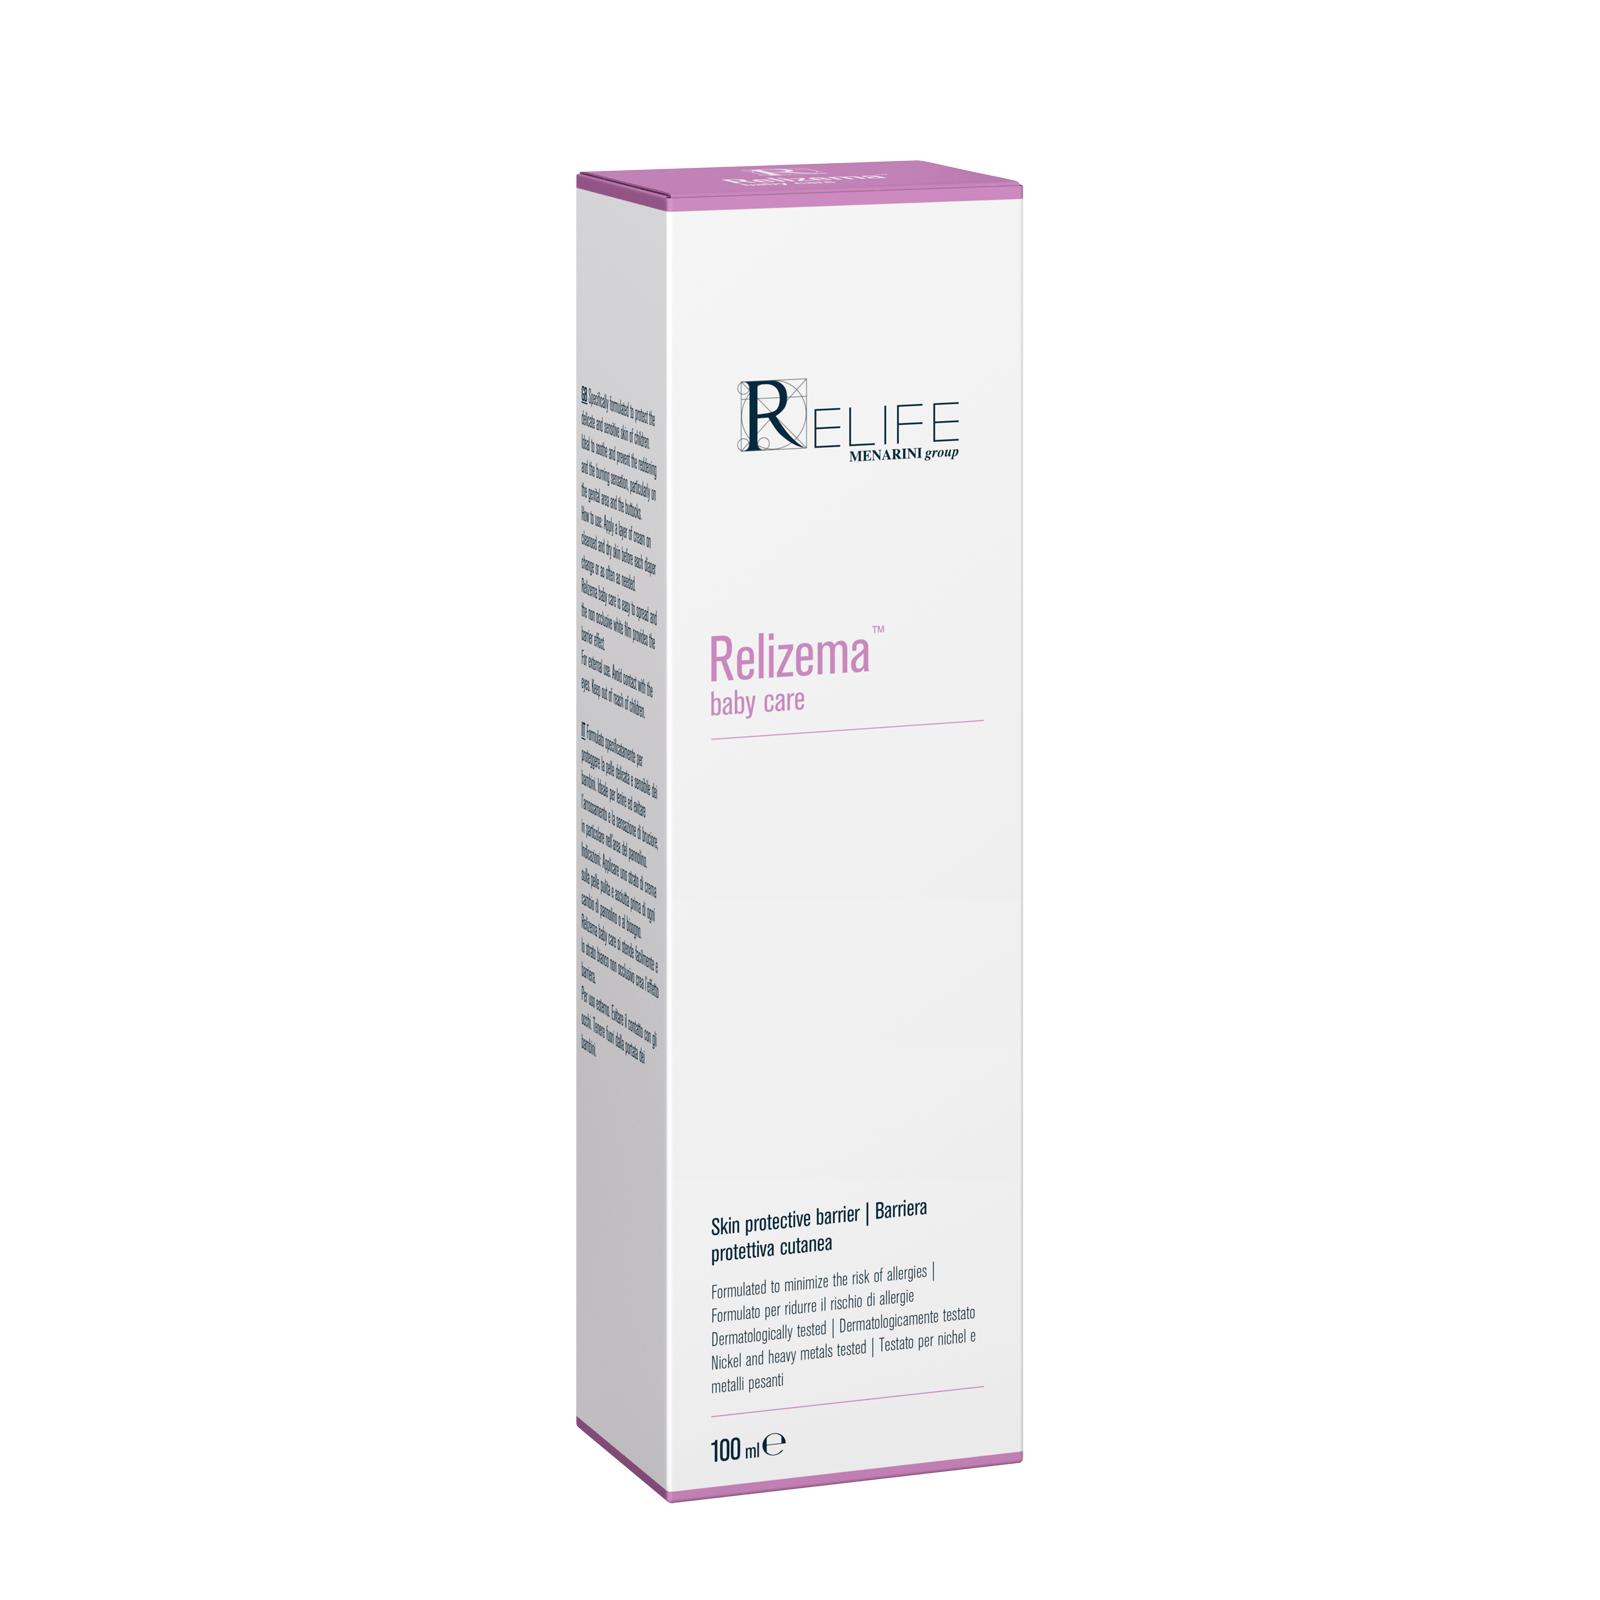 Relife Relizema Baby Care 100ml